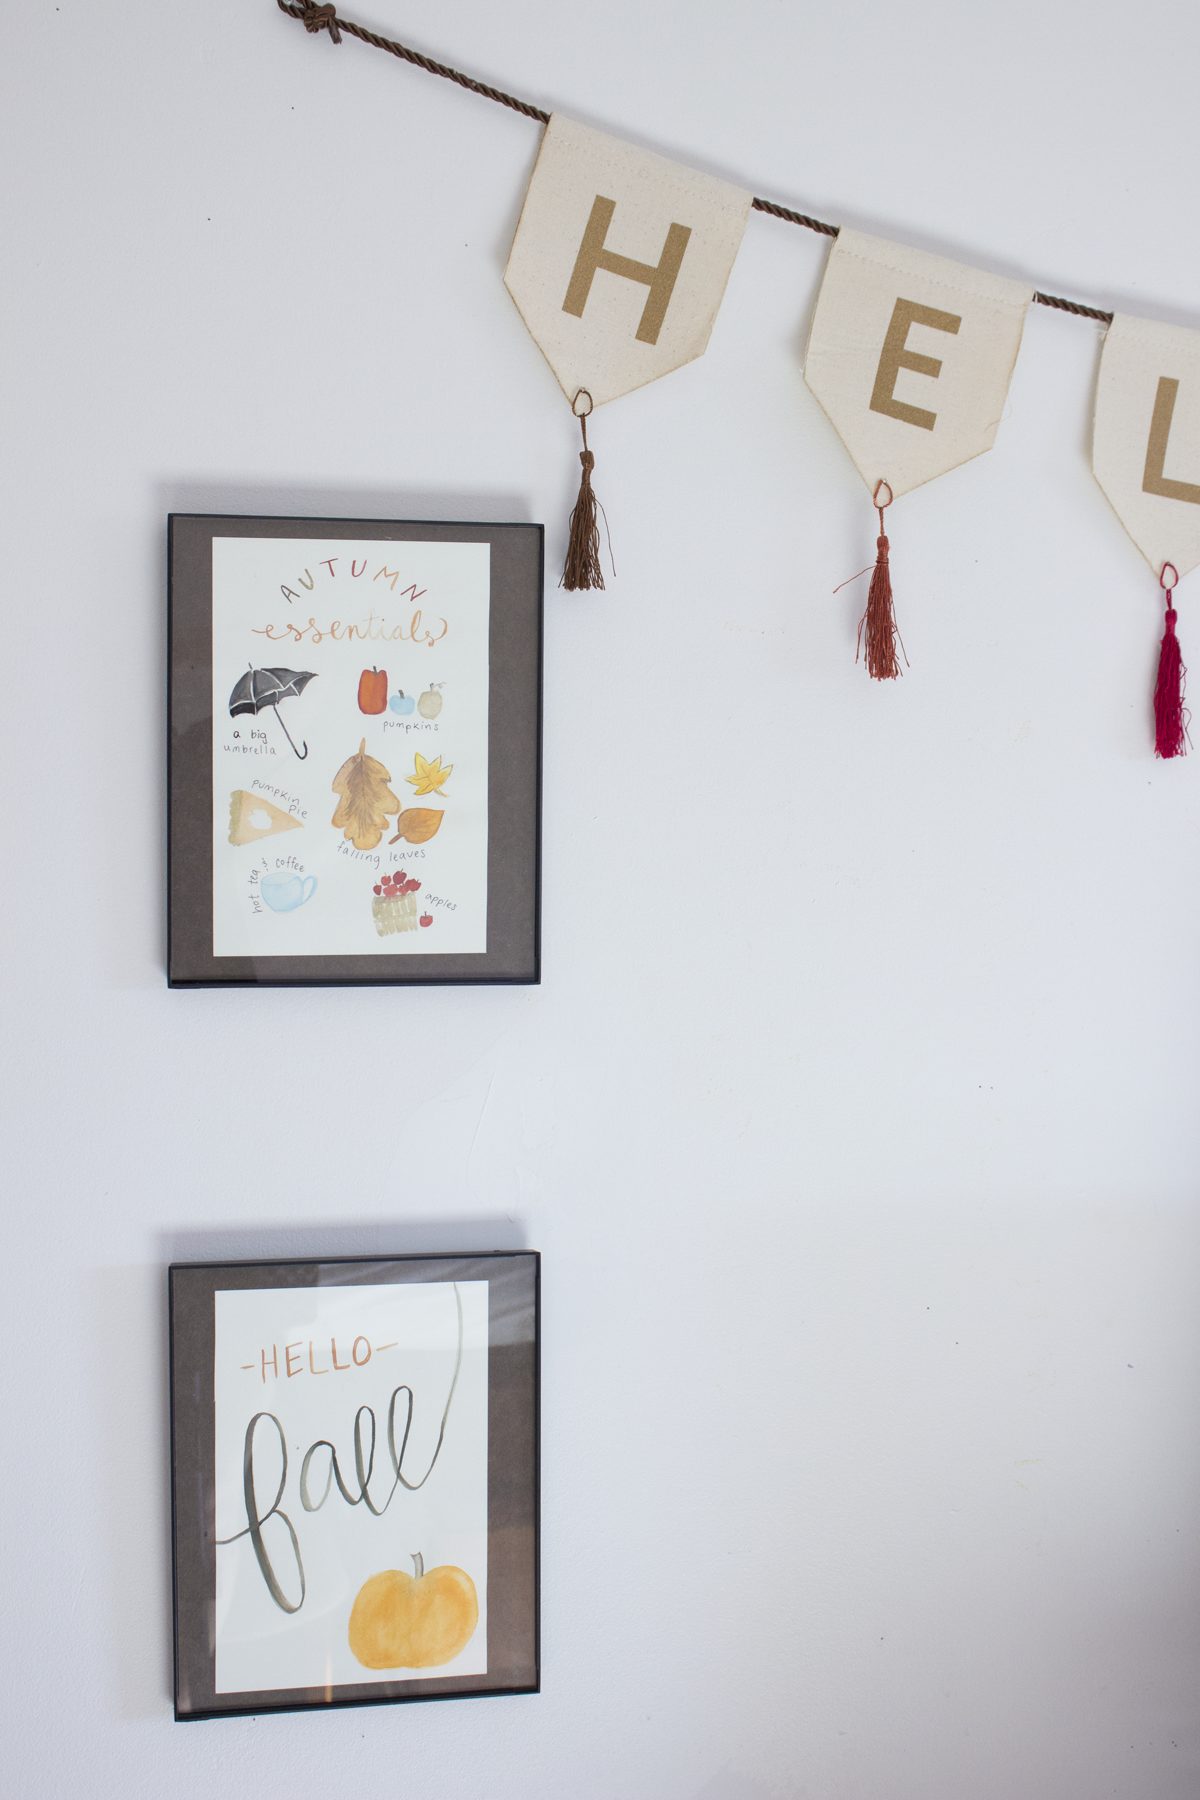 Subtle ways to decorate your space this fall | Perfect for college dorms, apartments, or bedrooms